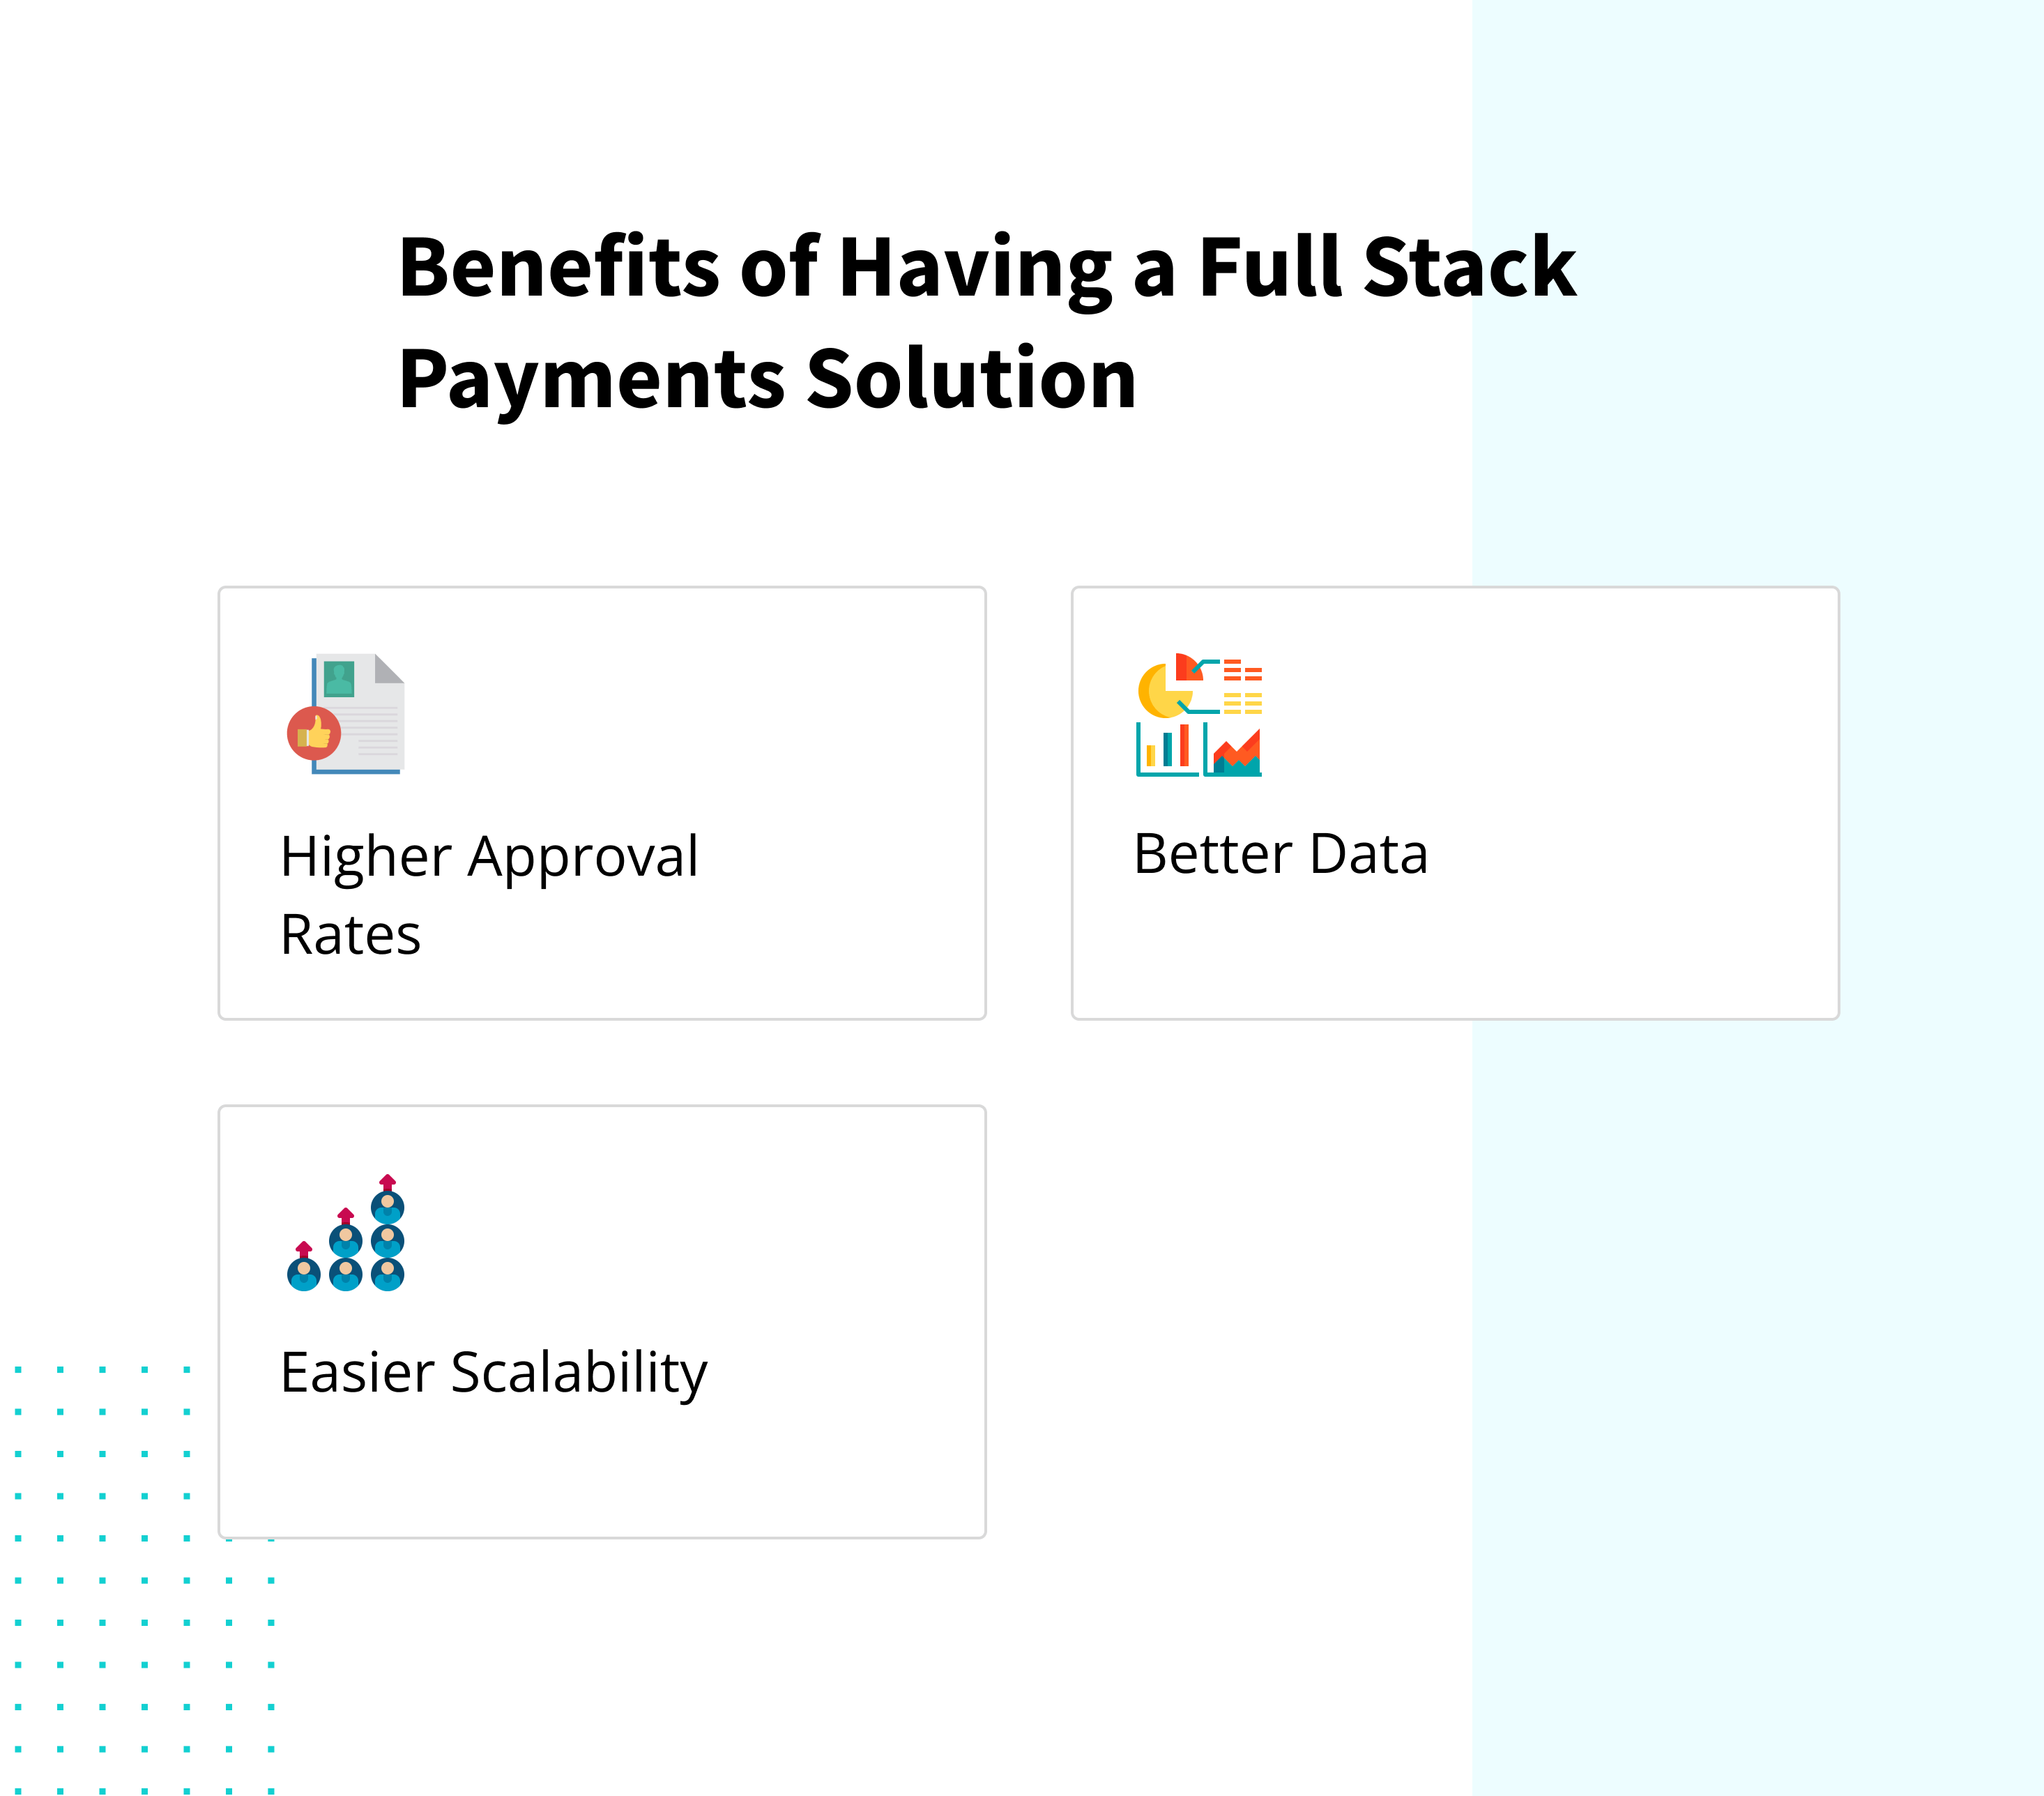 Benefits of Having a Full Stack Payments Solution